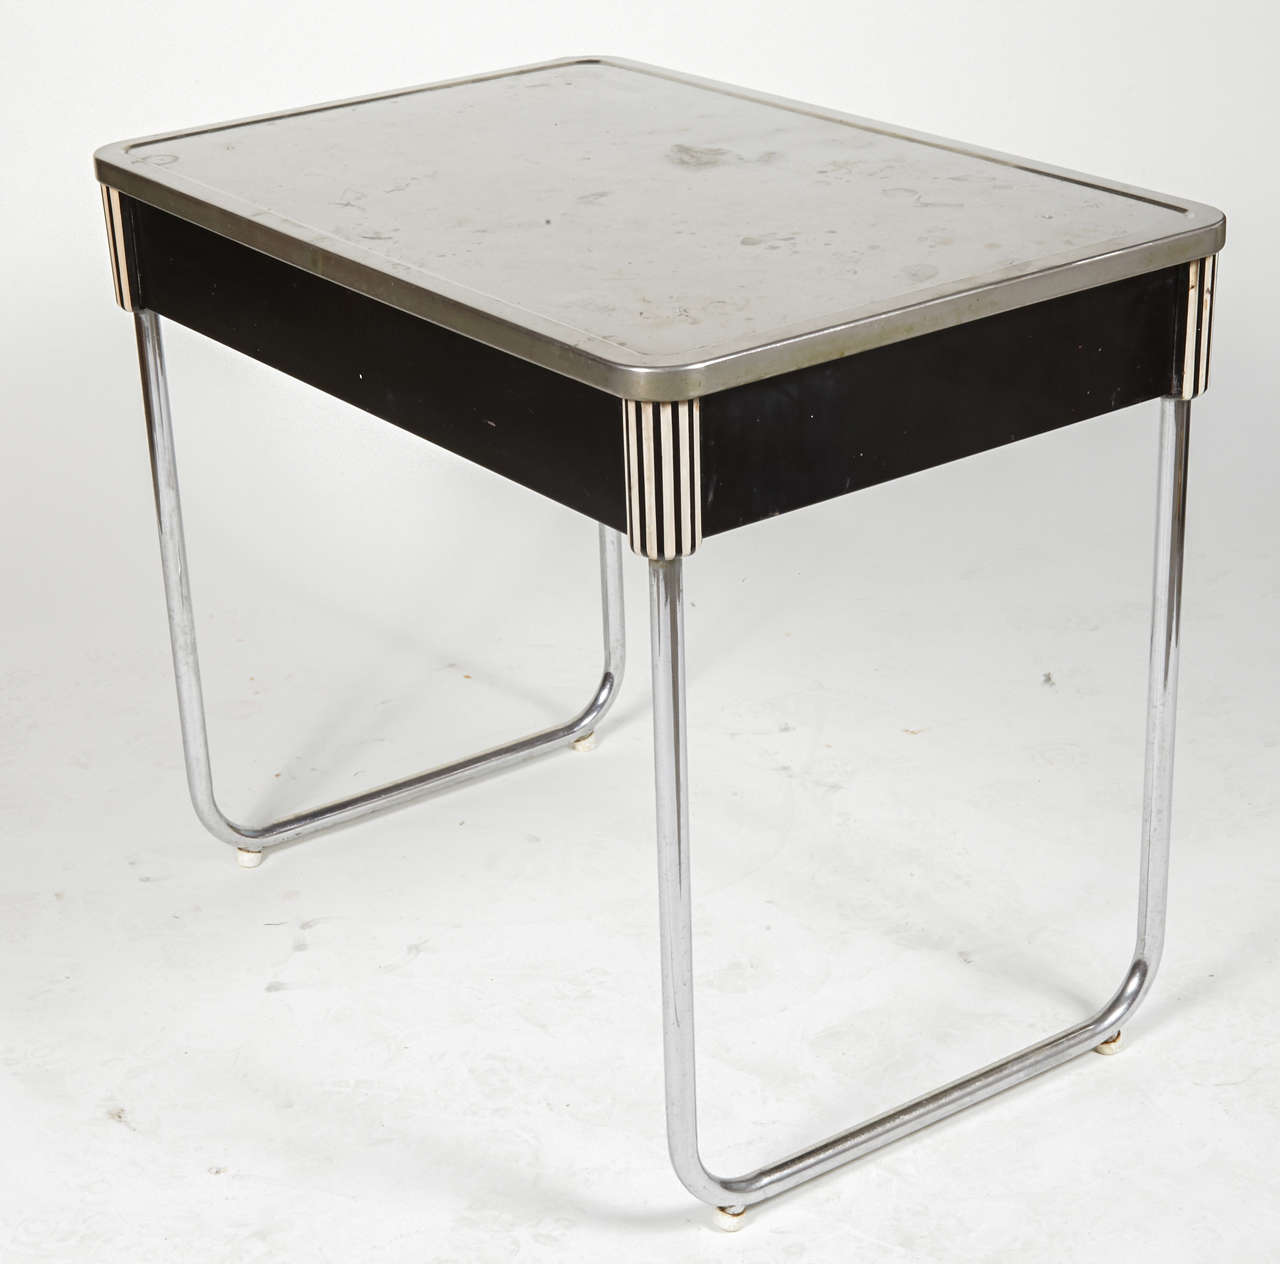 Original unrestored example of an important industrial design.
Fully signed design by Patten, retailed by the International Nickel Company. Patented design in 1933.

Featured in the Yale University permanent collection. Page 111, 